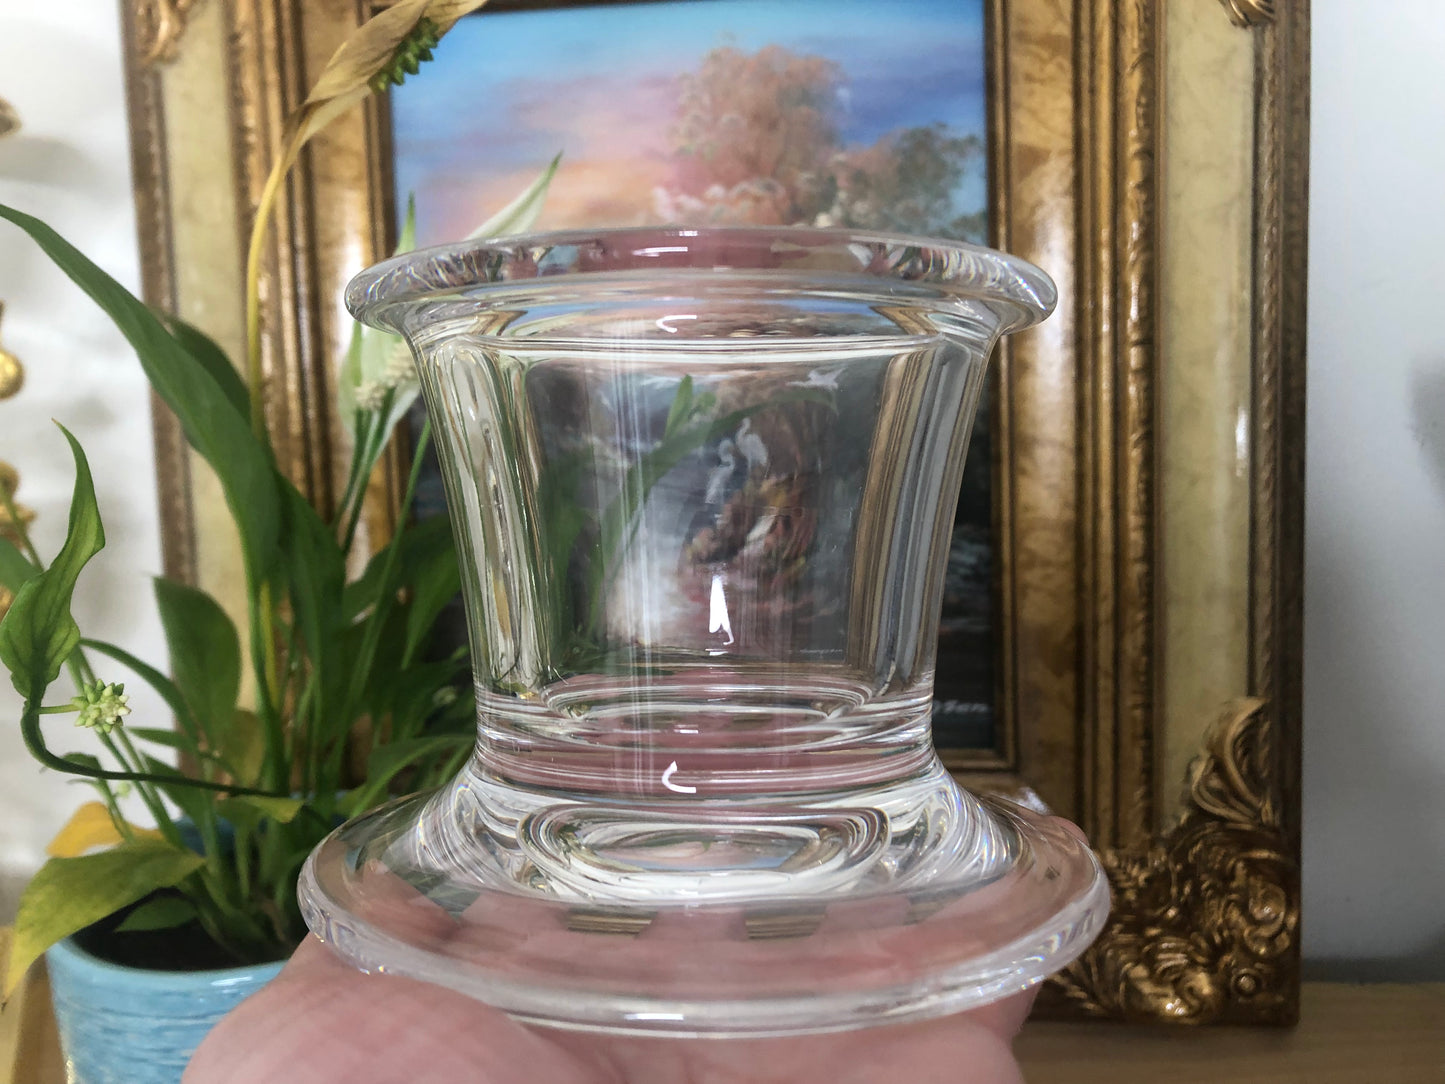 Lovely Tiffany and Co. candleholder - Excellent condition!